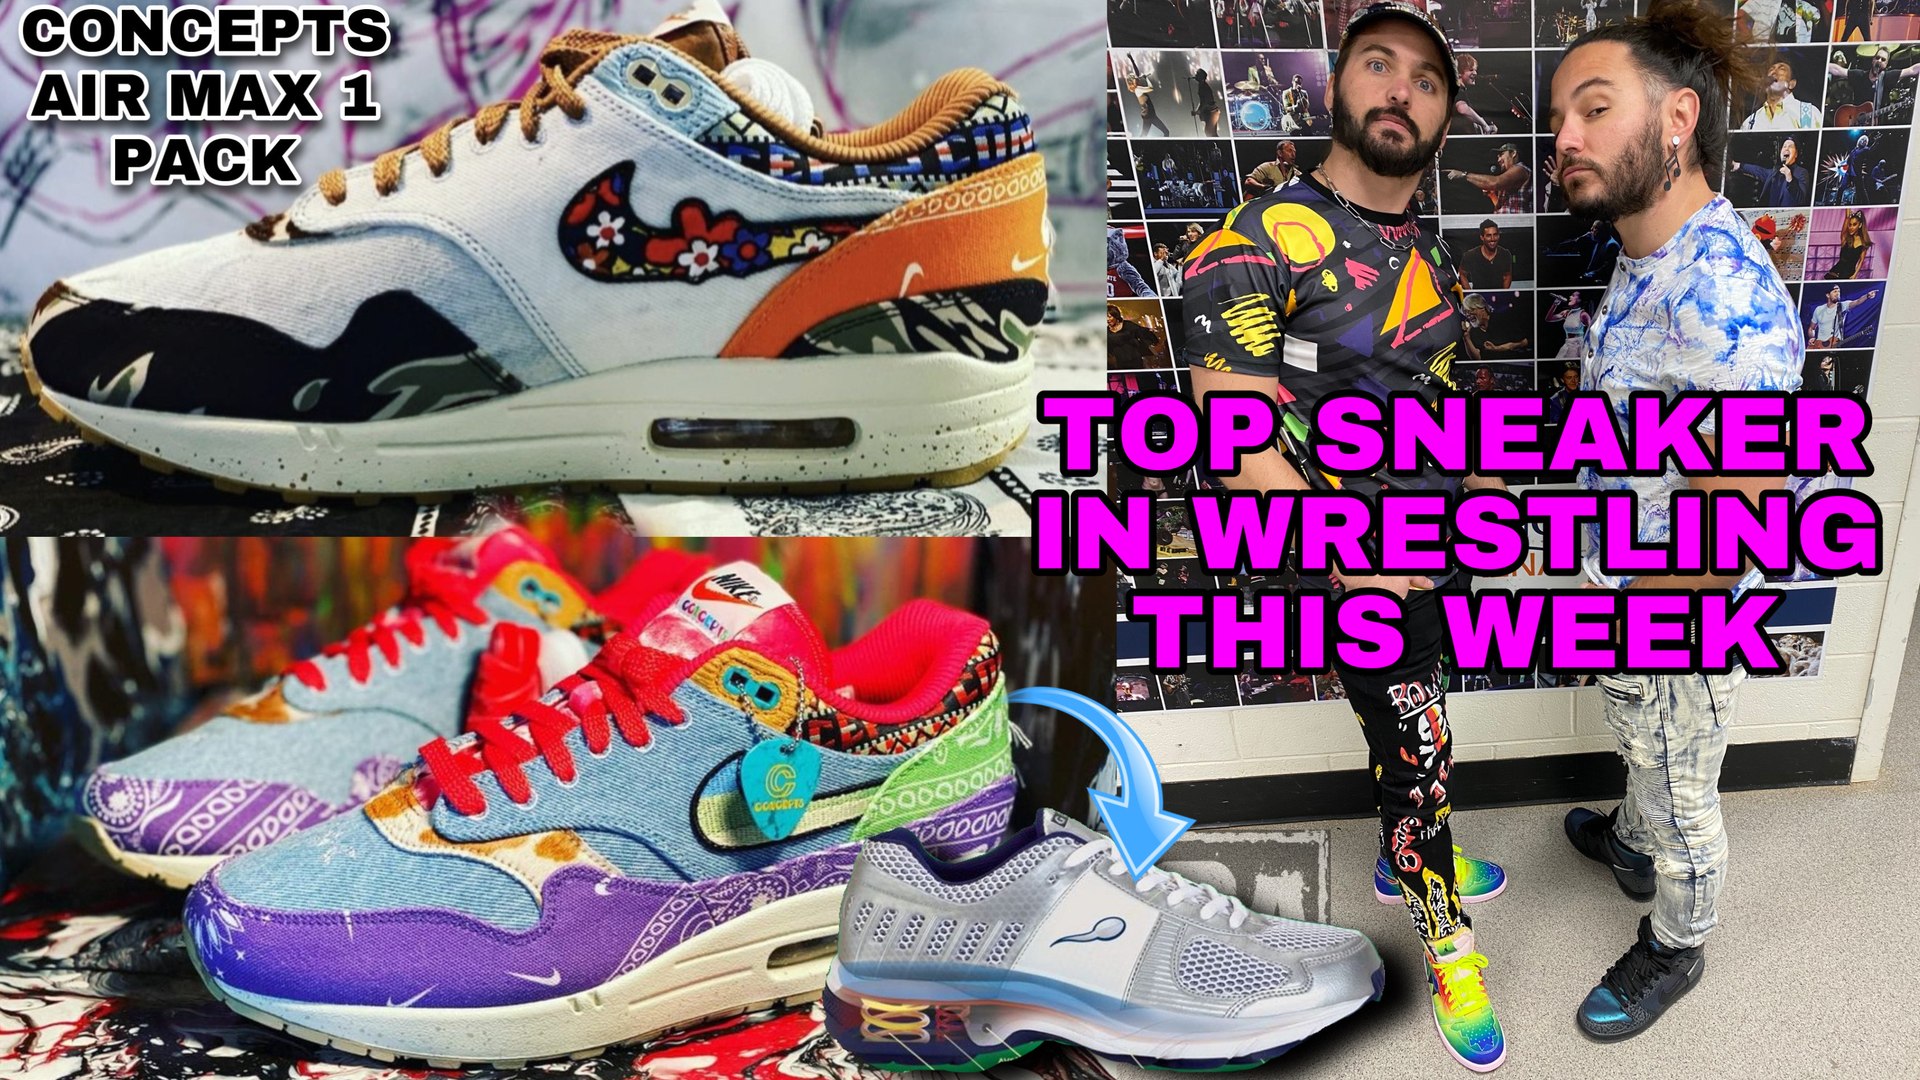 CONCEPT NIKE AIR MAX 1 PACK,TOP SNEAKER IN WWE RAW VS AEW WRESTLING THIS  WEEK,SPERM SHOES,CDG NIKE AM 1 - video Dailymotion